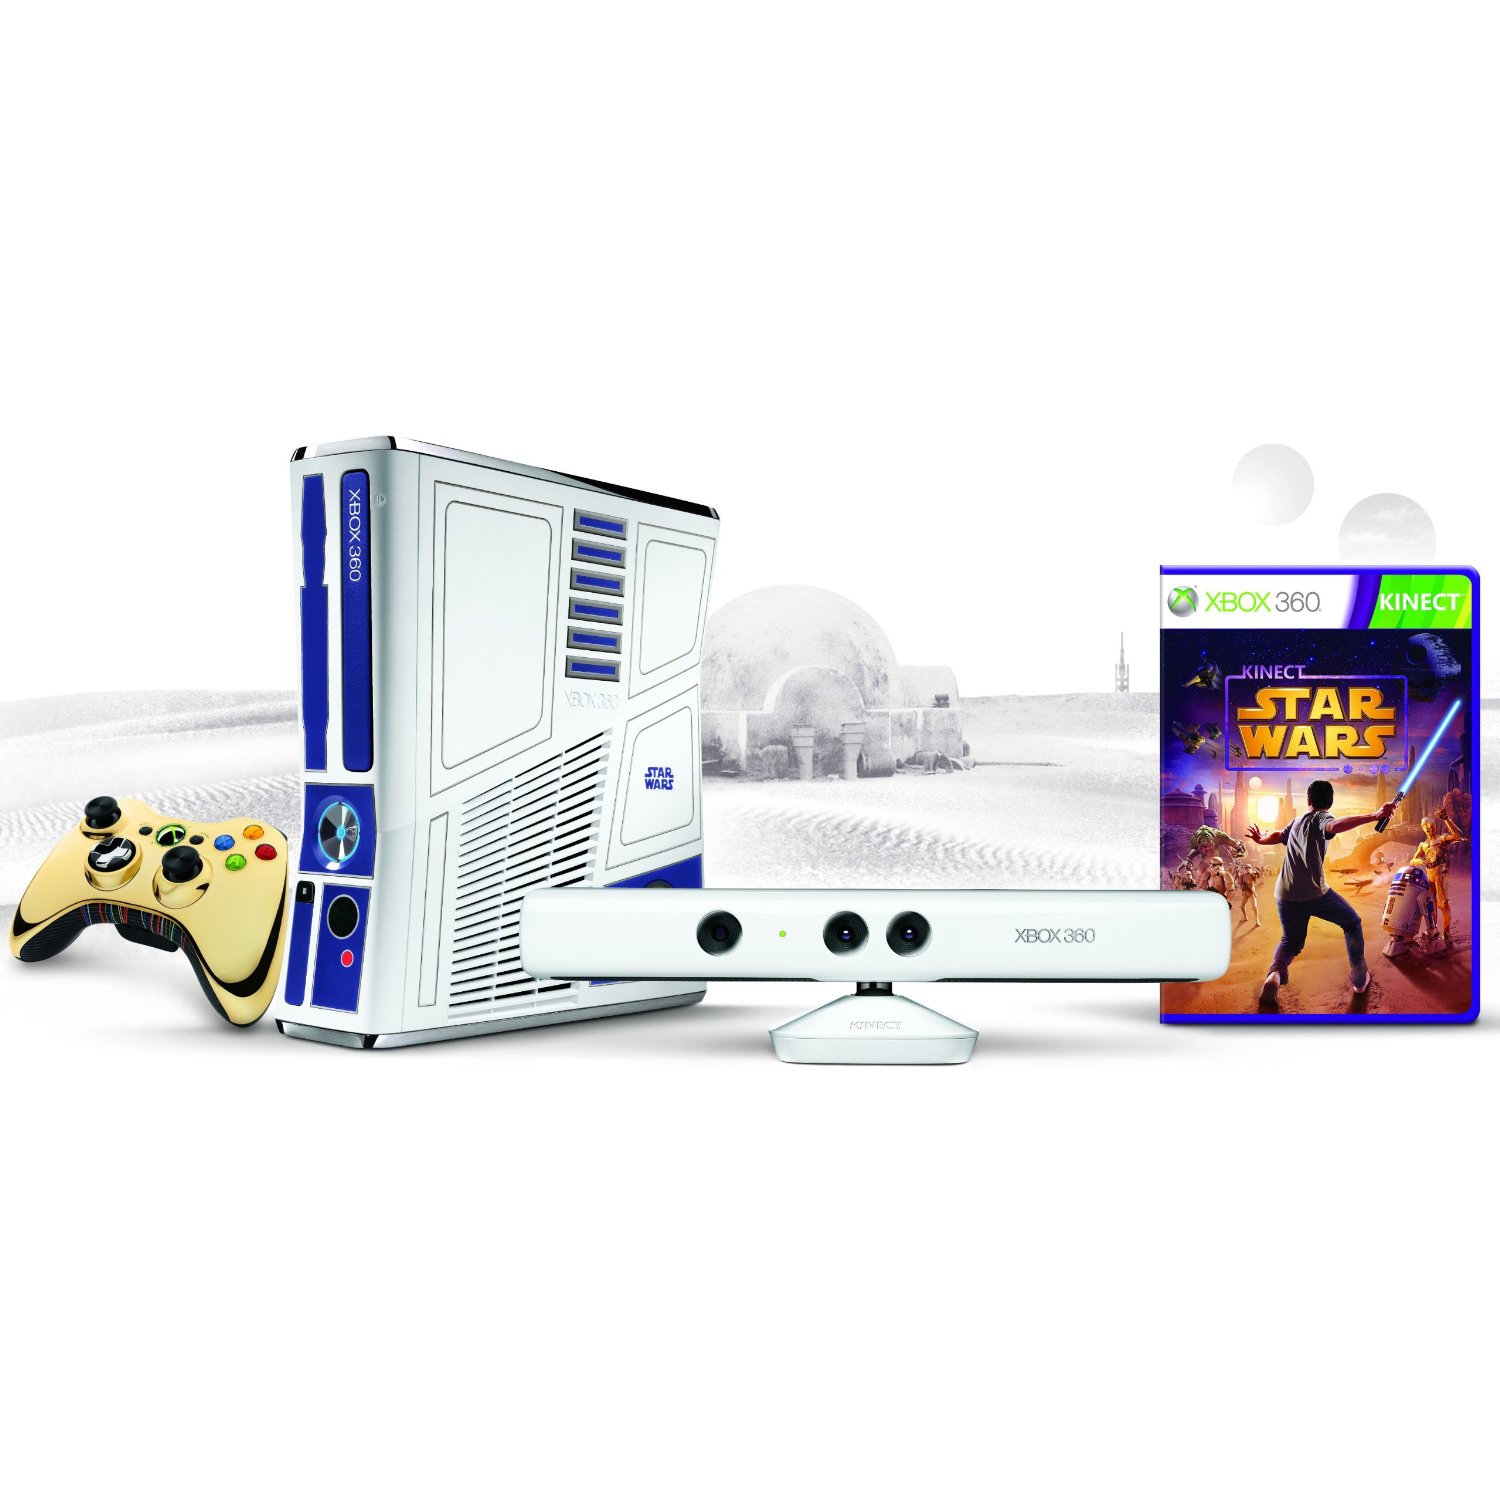 Upcoming Star Wars Game For Xbox 360